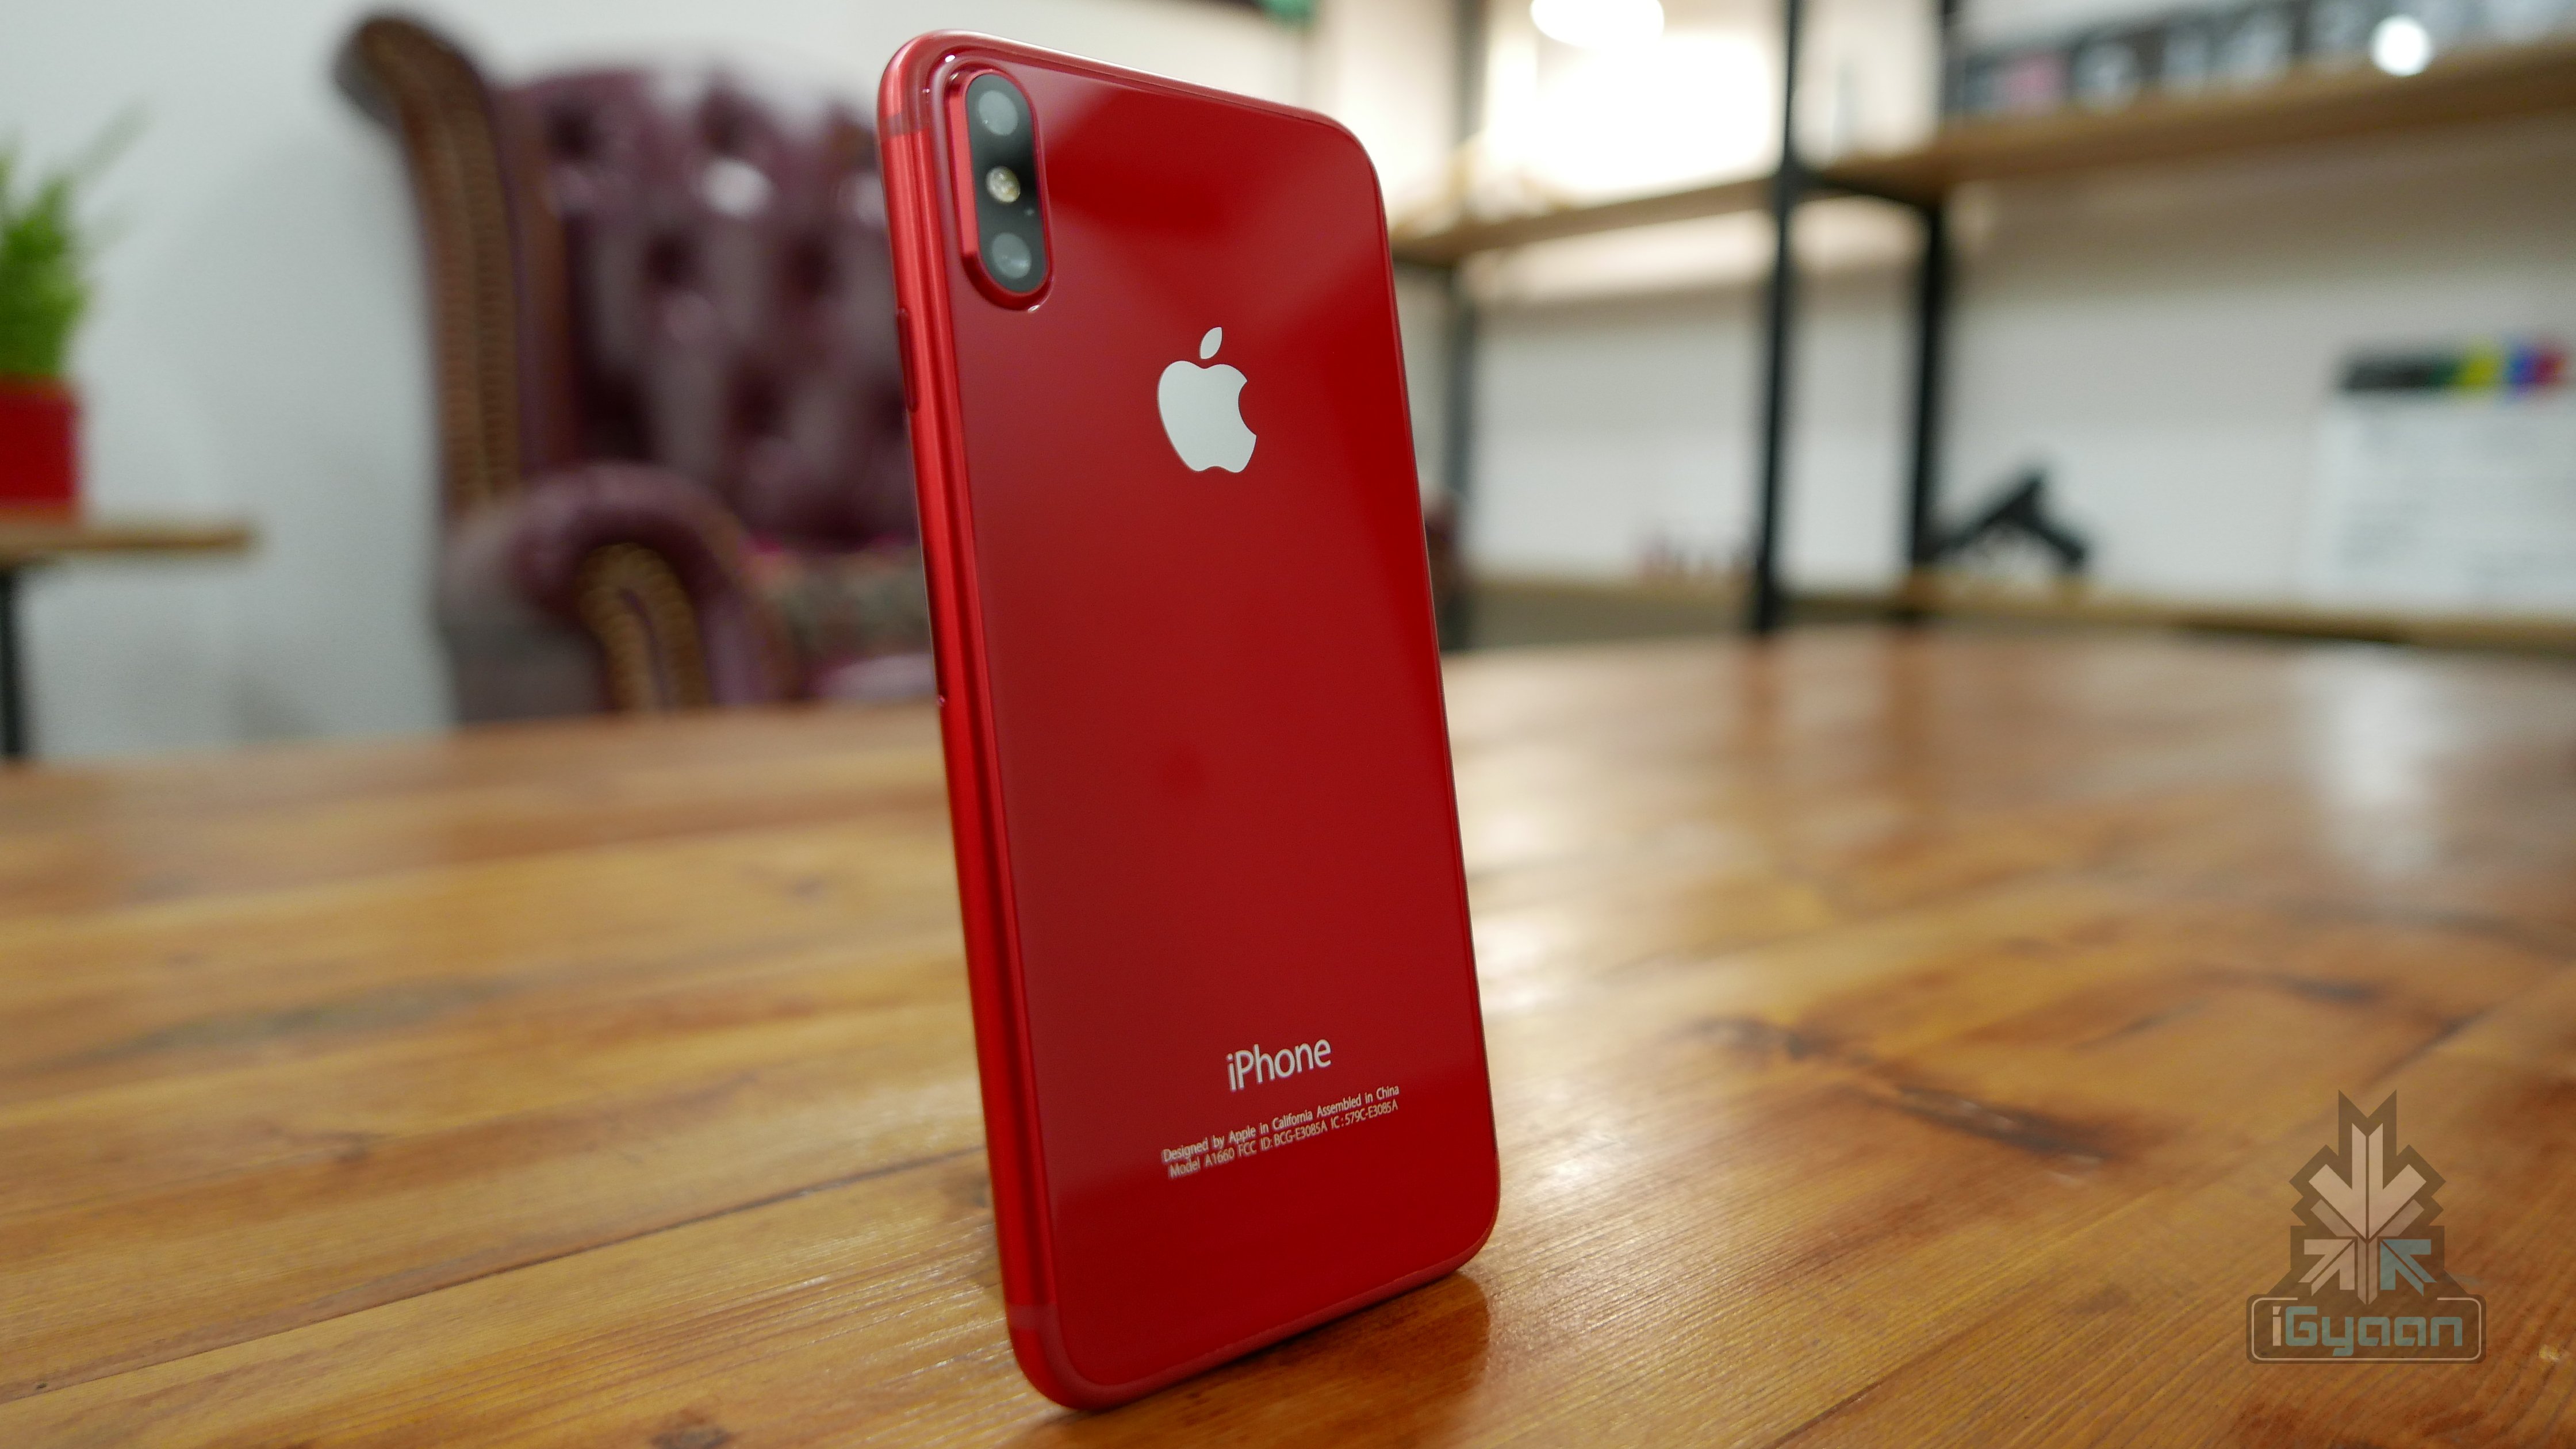 Product 07. Apple iphone 7 product Red. Iphone x Red. Iphone 10 XR красный. Apple iphone x красный.